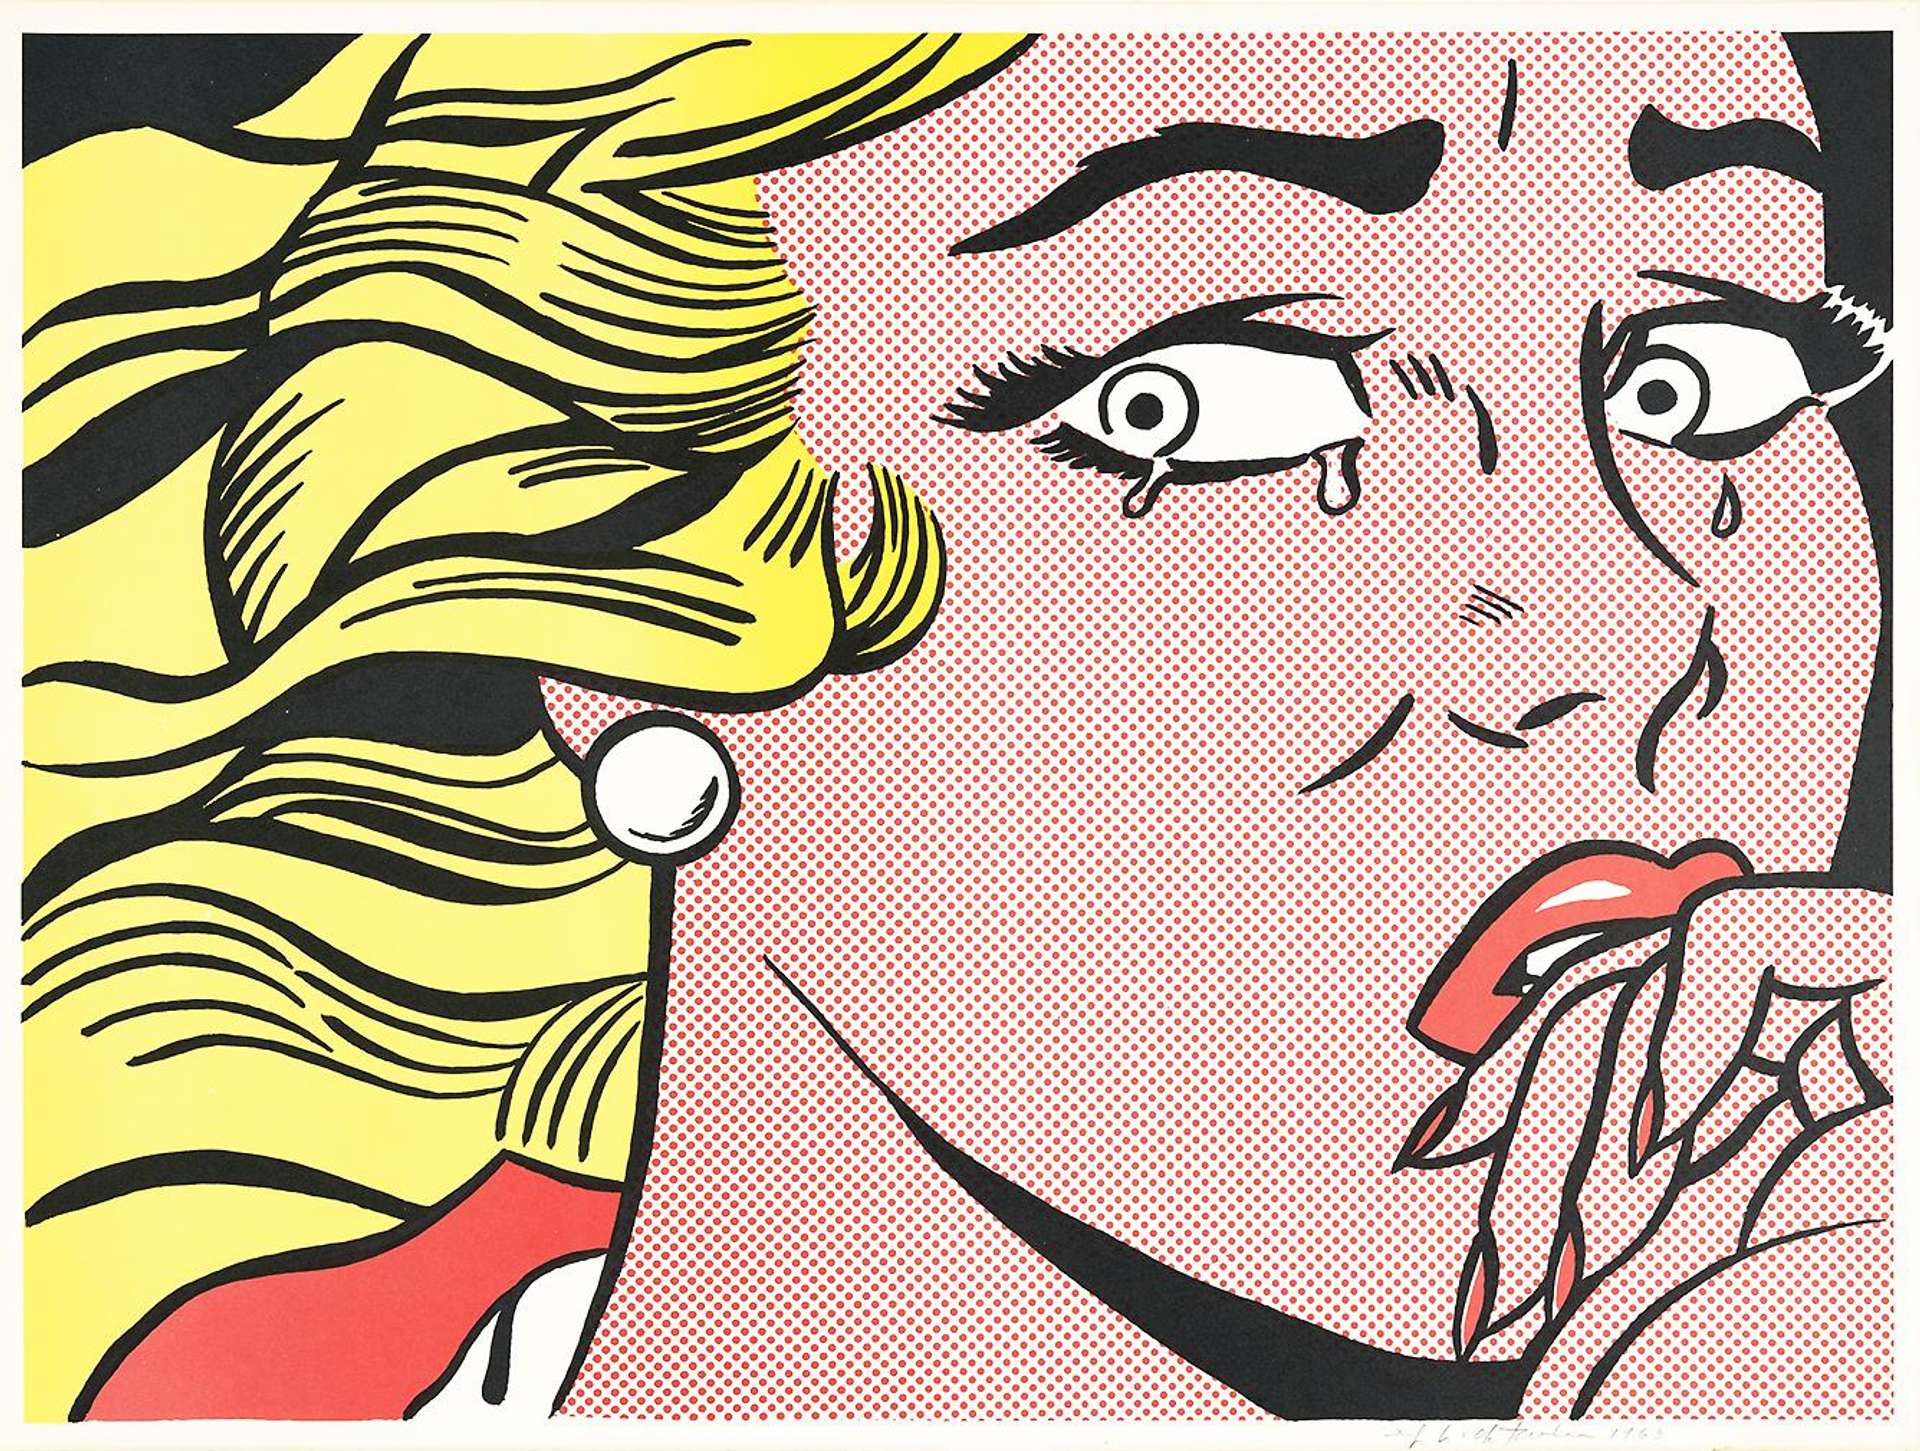 A screenprint by Roy Lichtenstein depicting a blonde woman with long hair in distress, against a red background.